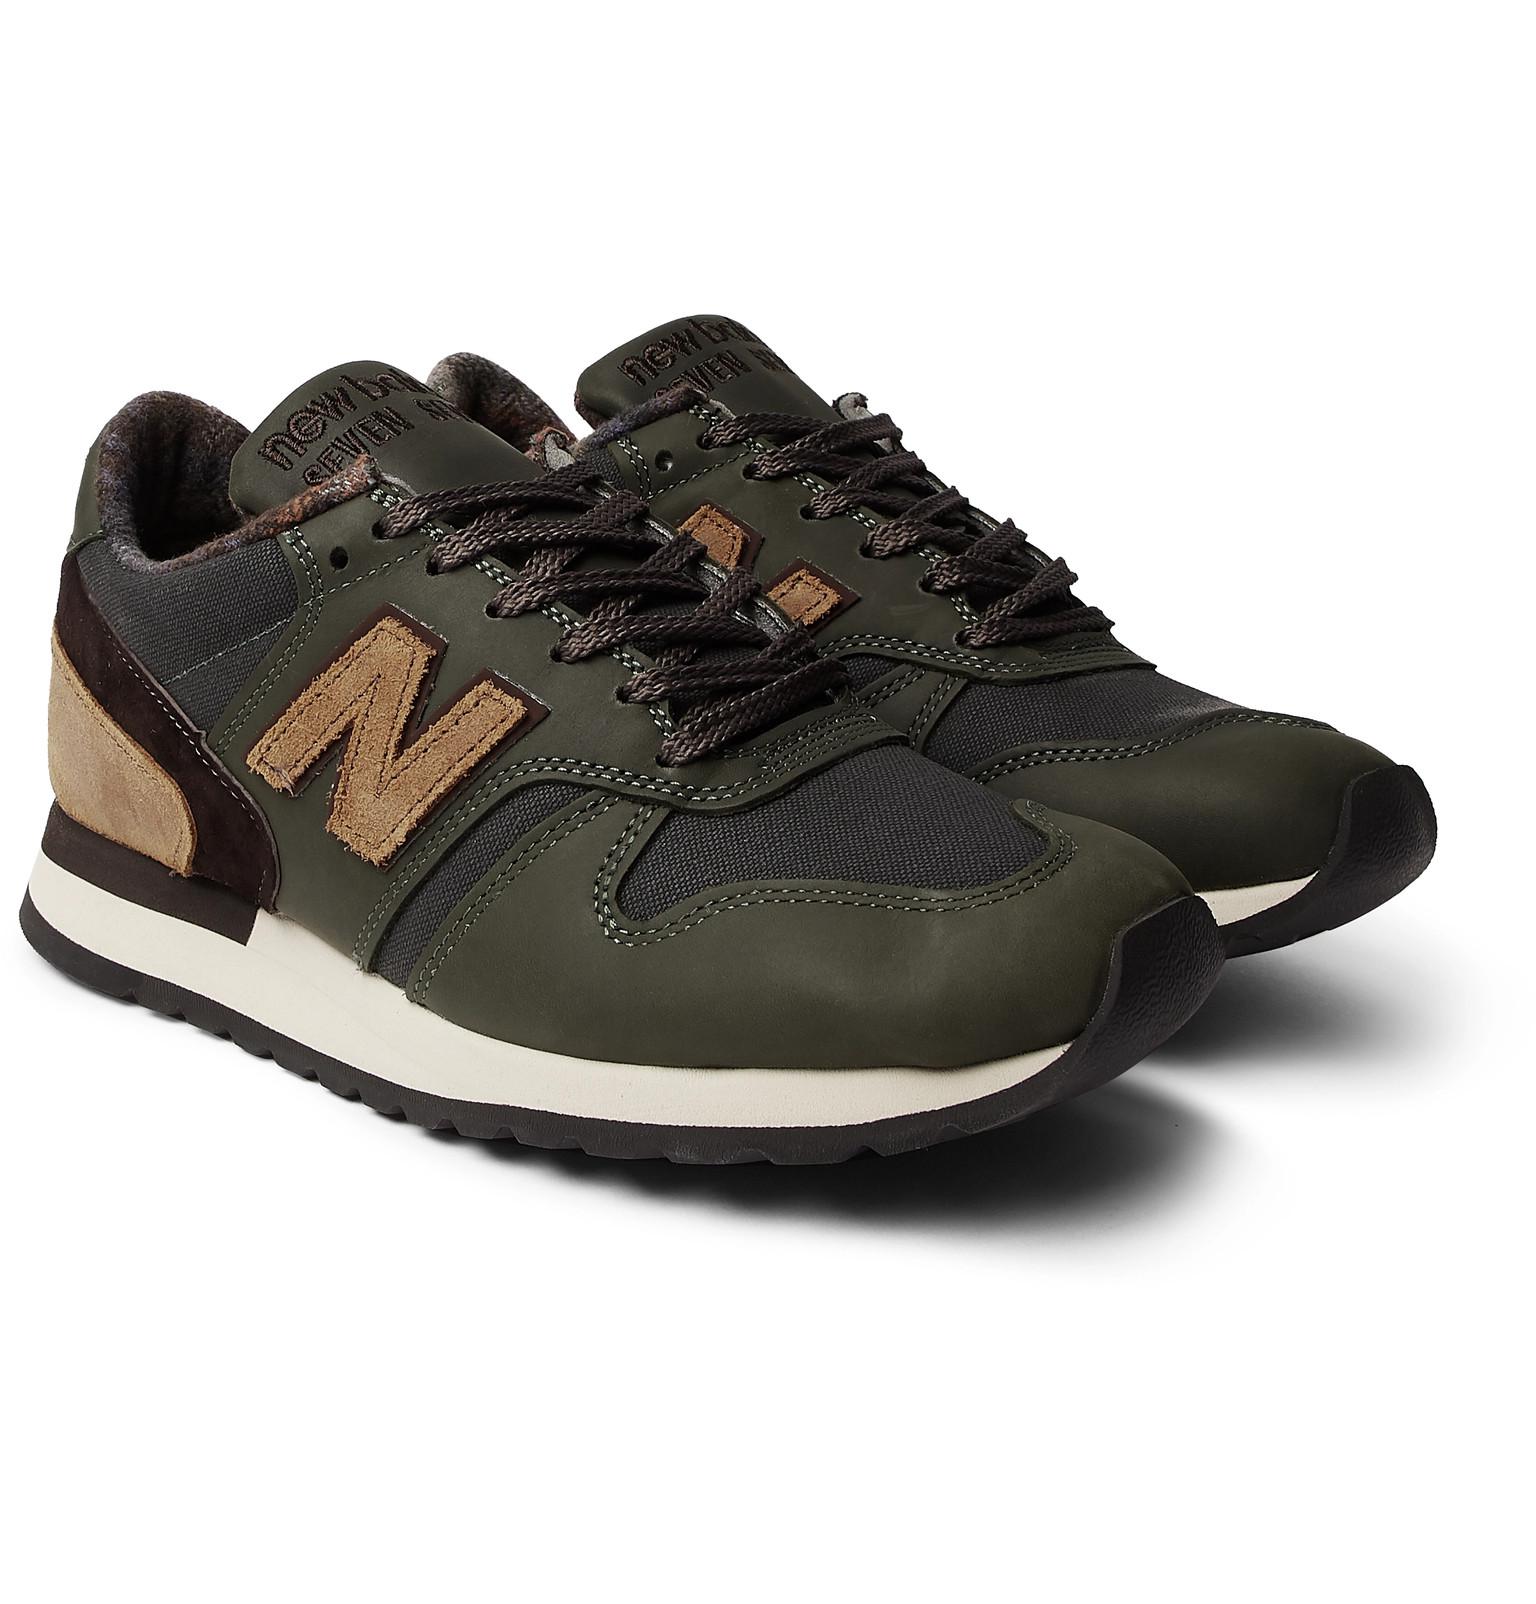 new balance 530 trainers green forest beige